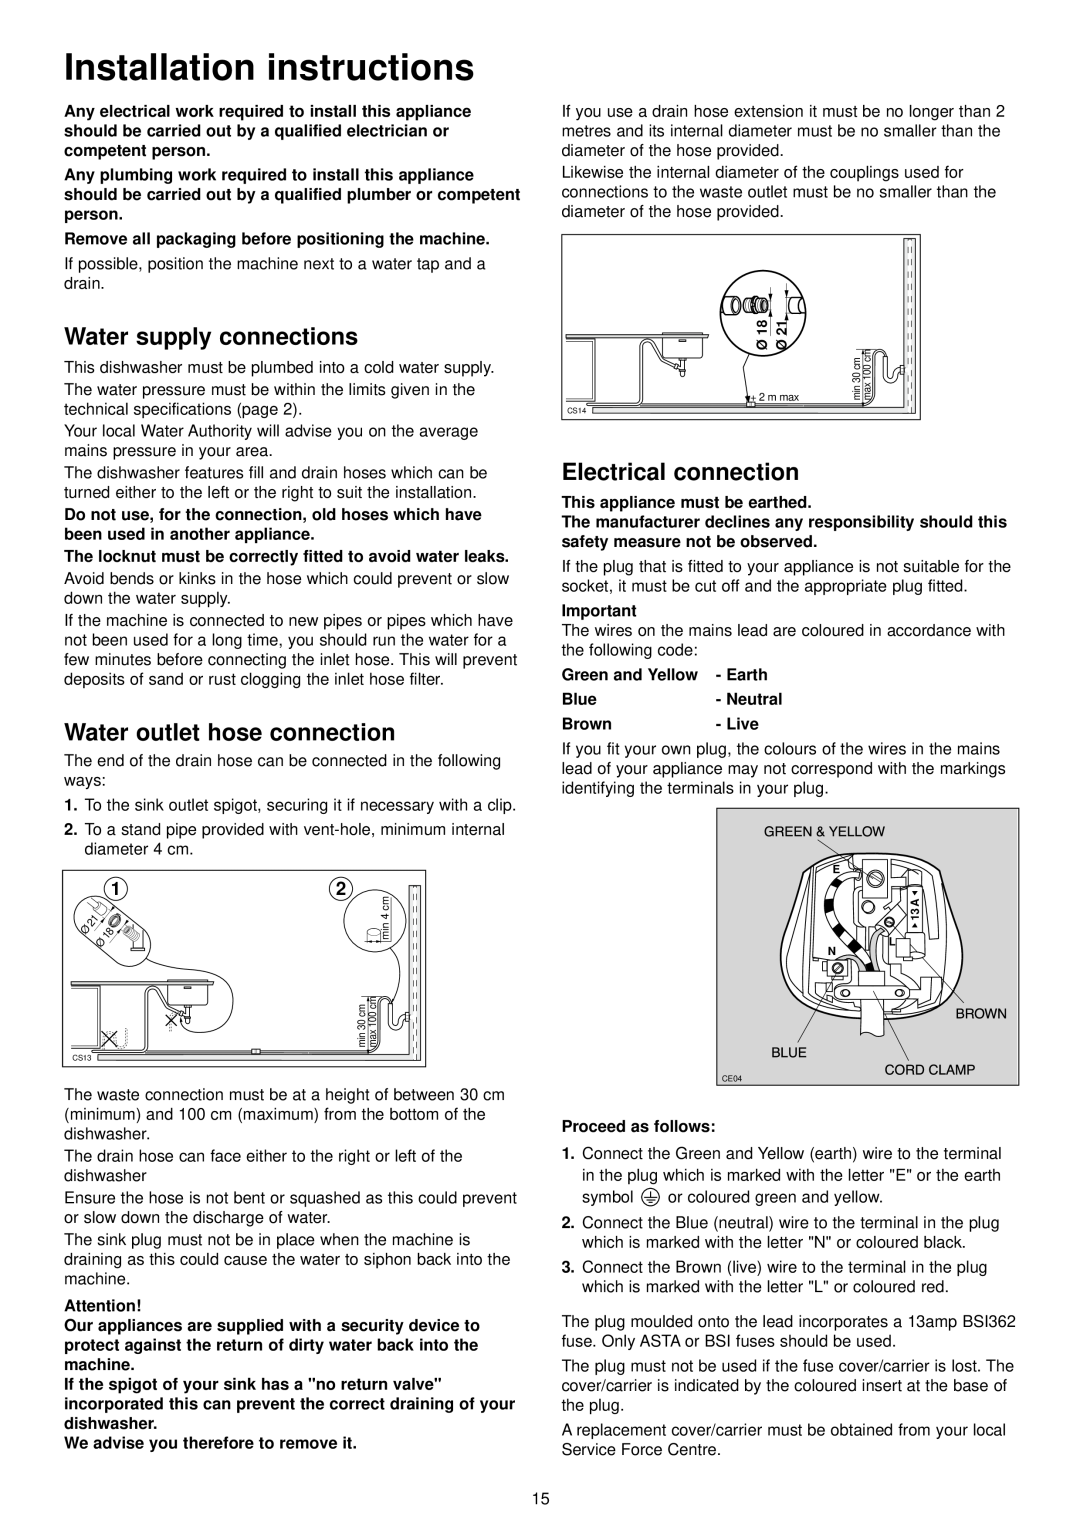 Zanussi ZDT 5052 Installation instructions, Water supply connections, Water outlet hose connection, Electrical connection 